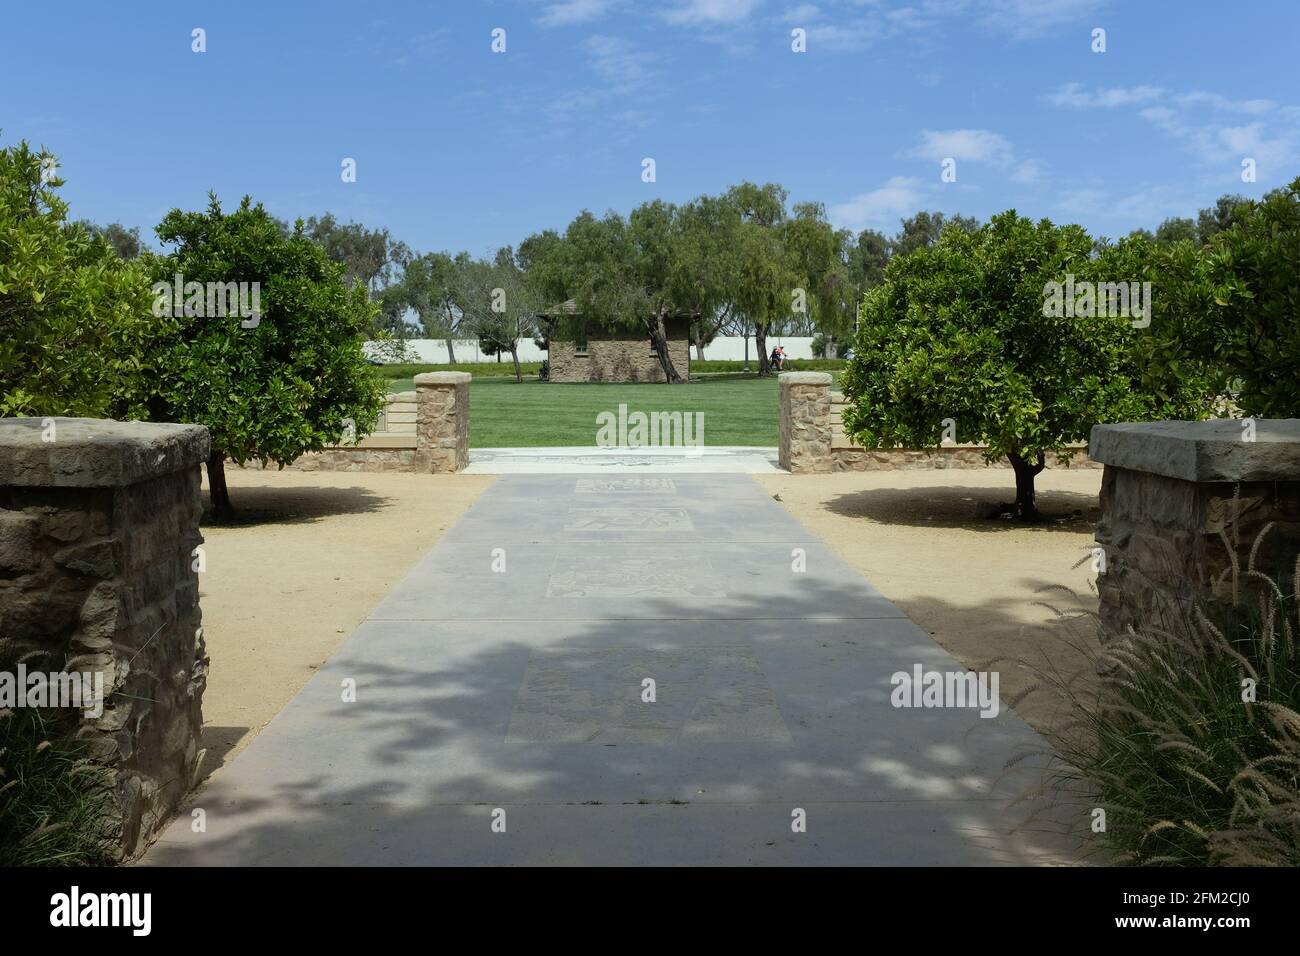 IRVINE, CALIFORNIA - 1 MAY 2021: The Orange Grove in the Jeffrey Open Space Trail. Stock Photo